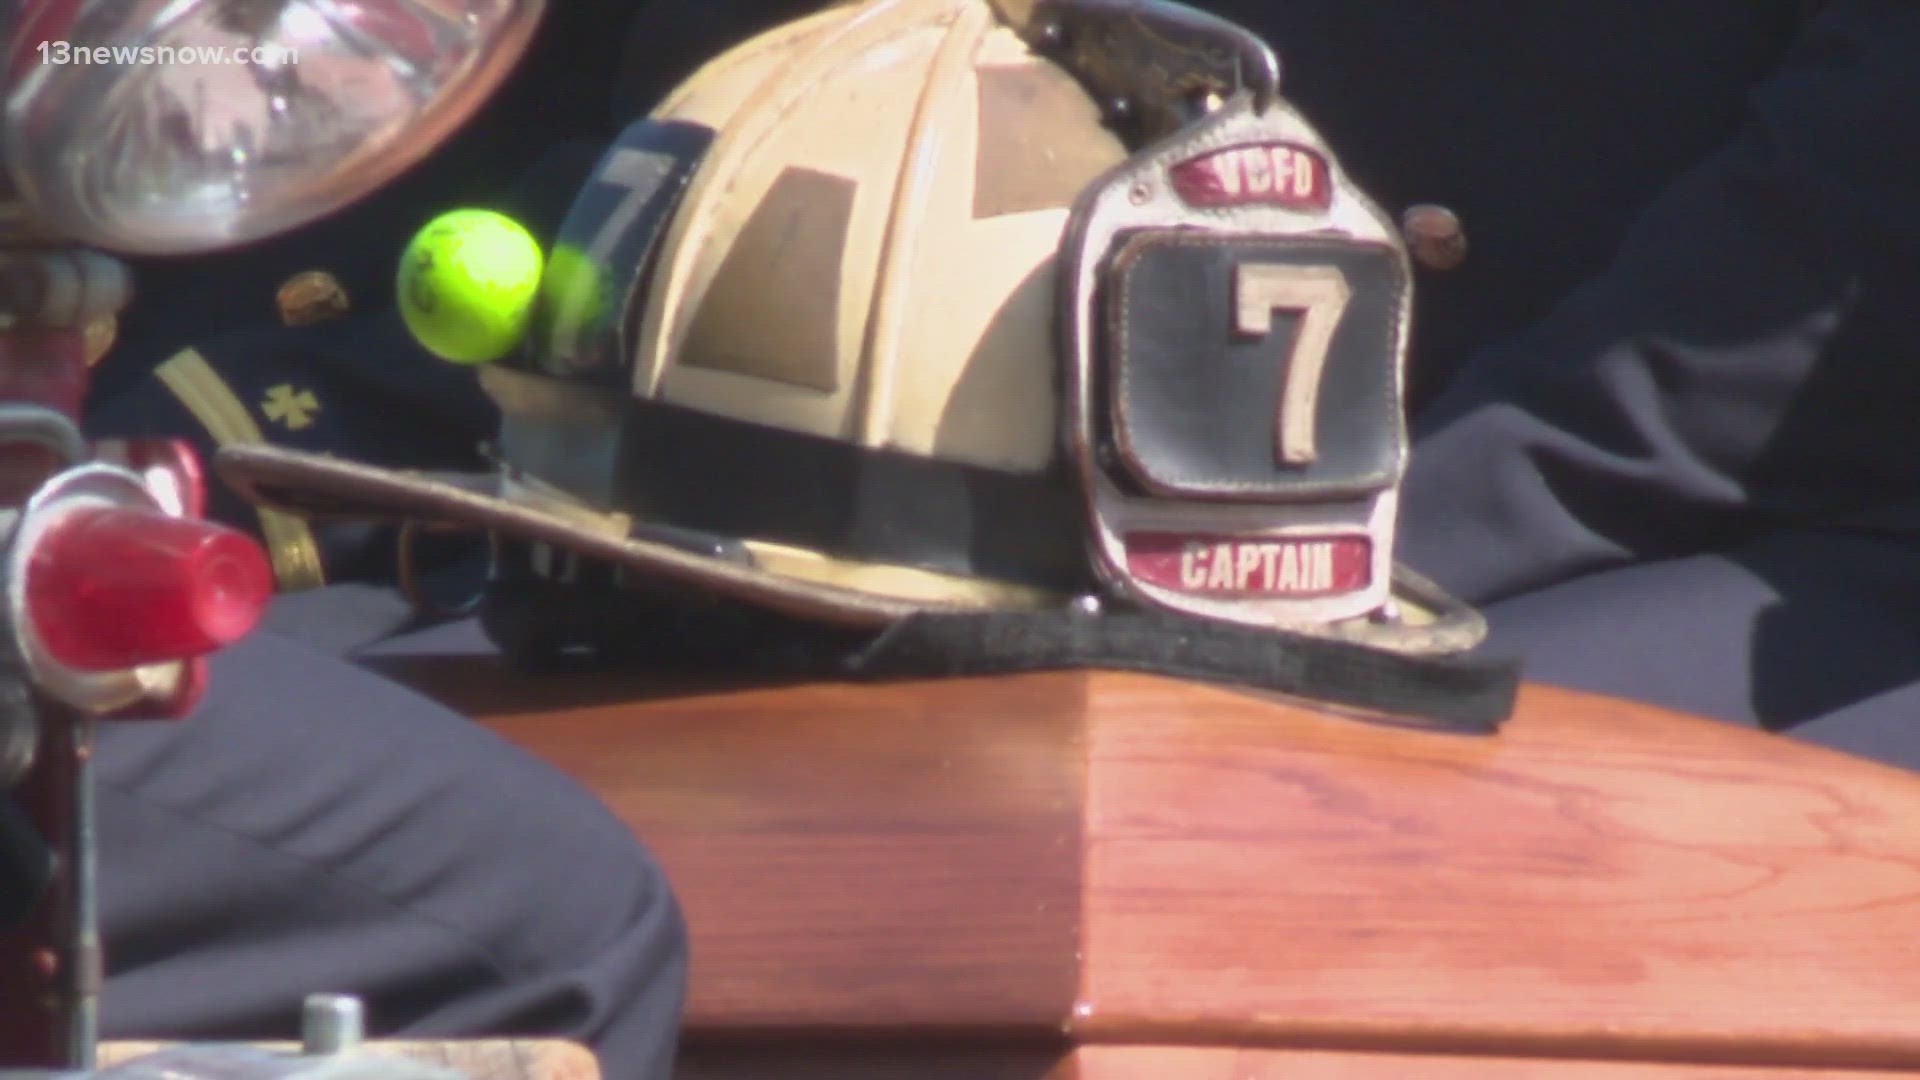 Cancer is the leading cause of death among firefighters, according to the CDC.